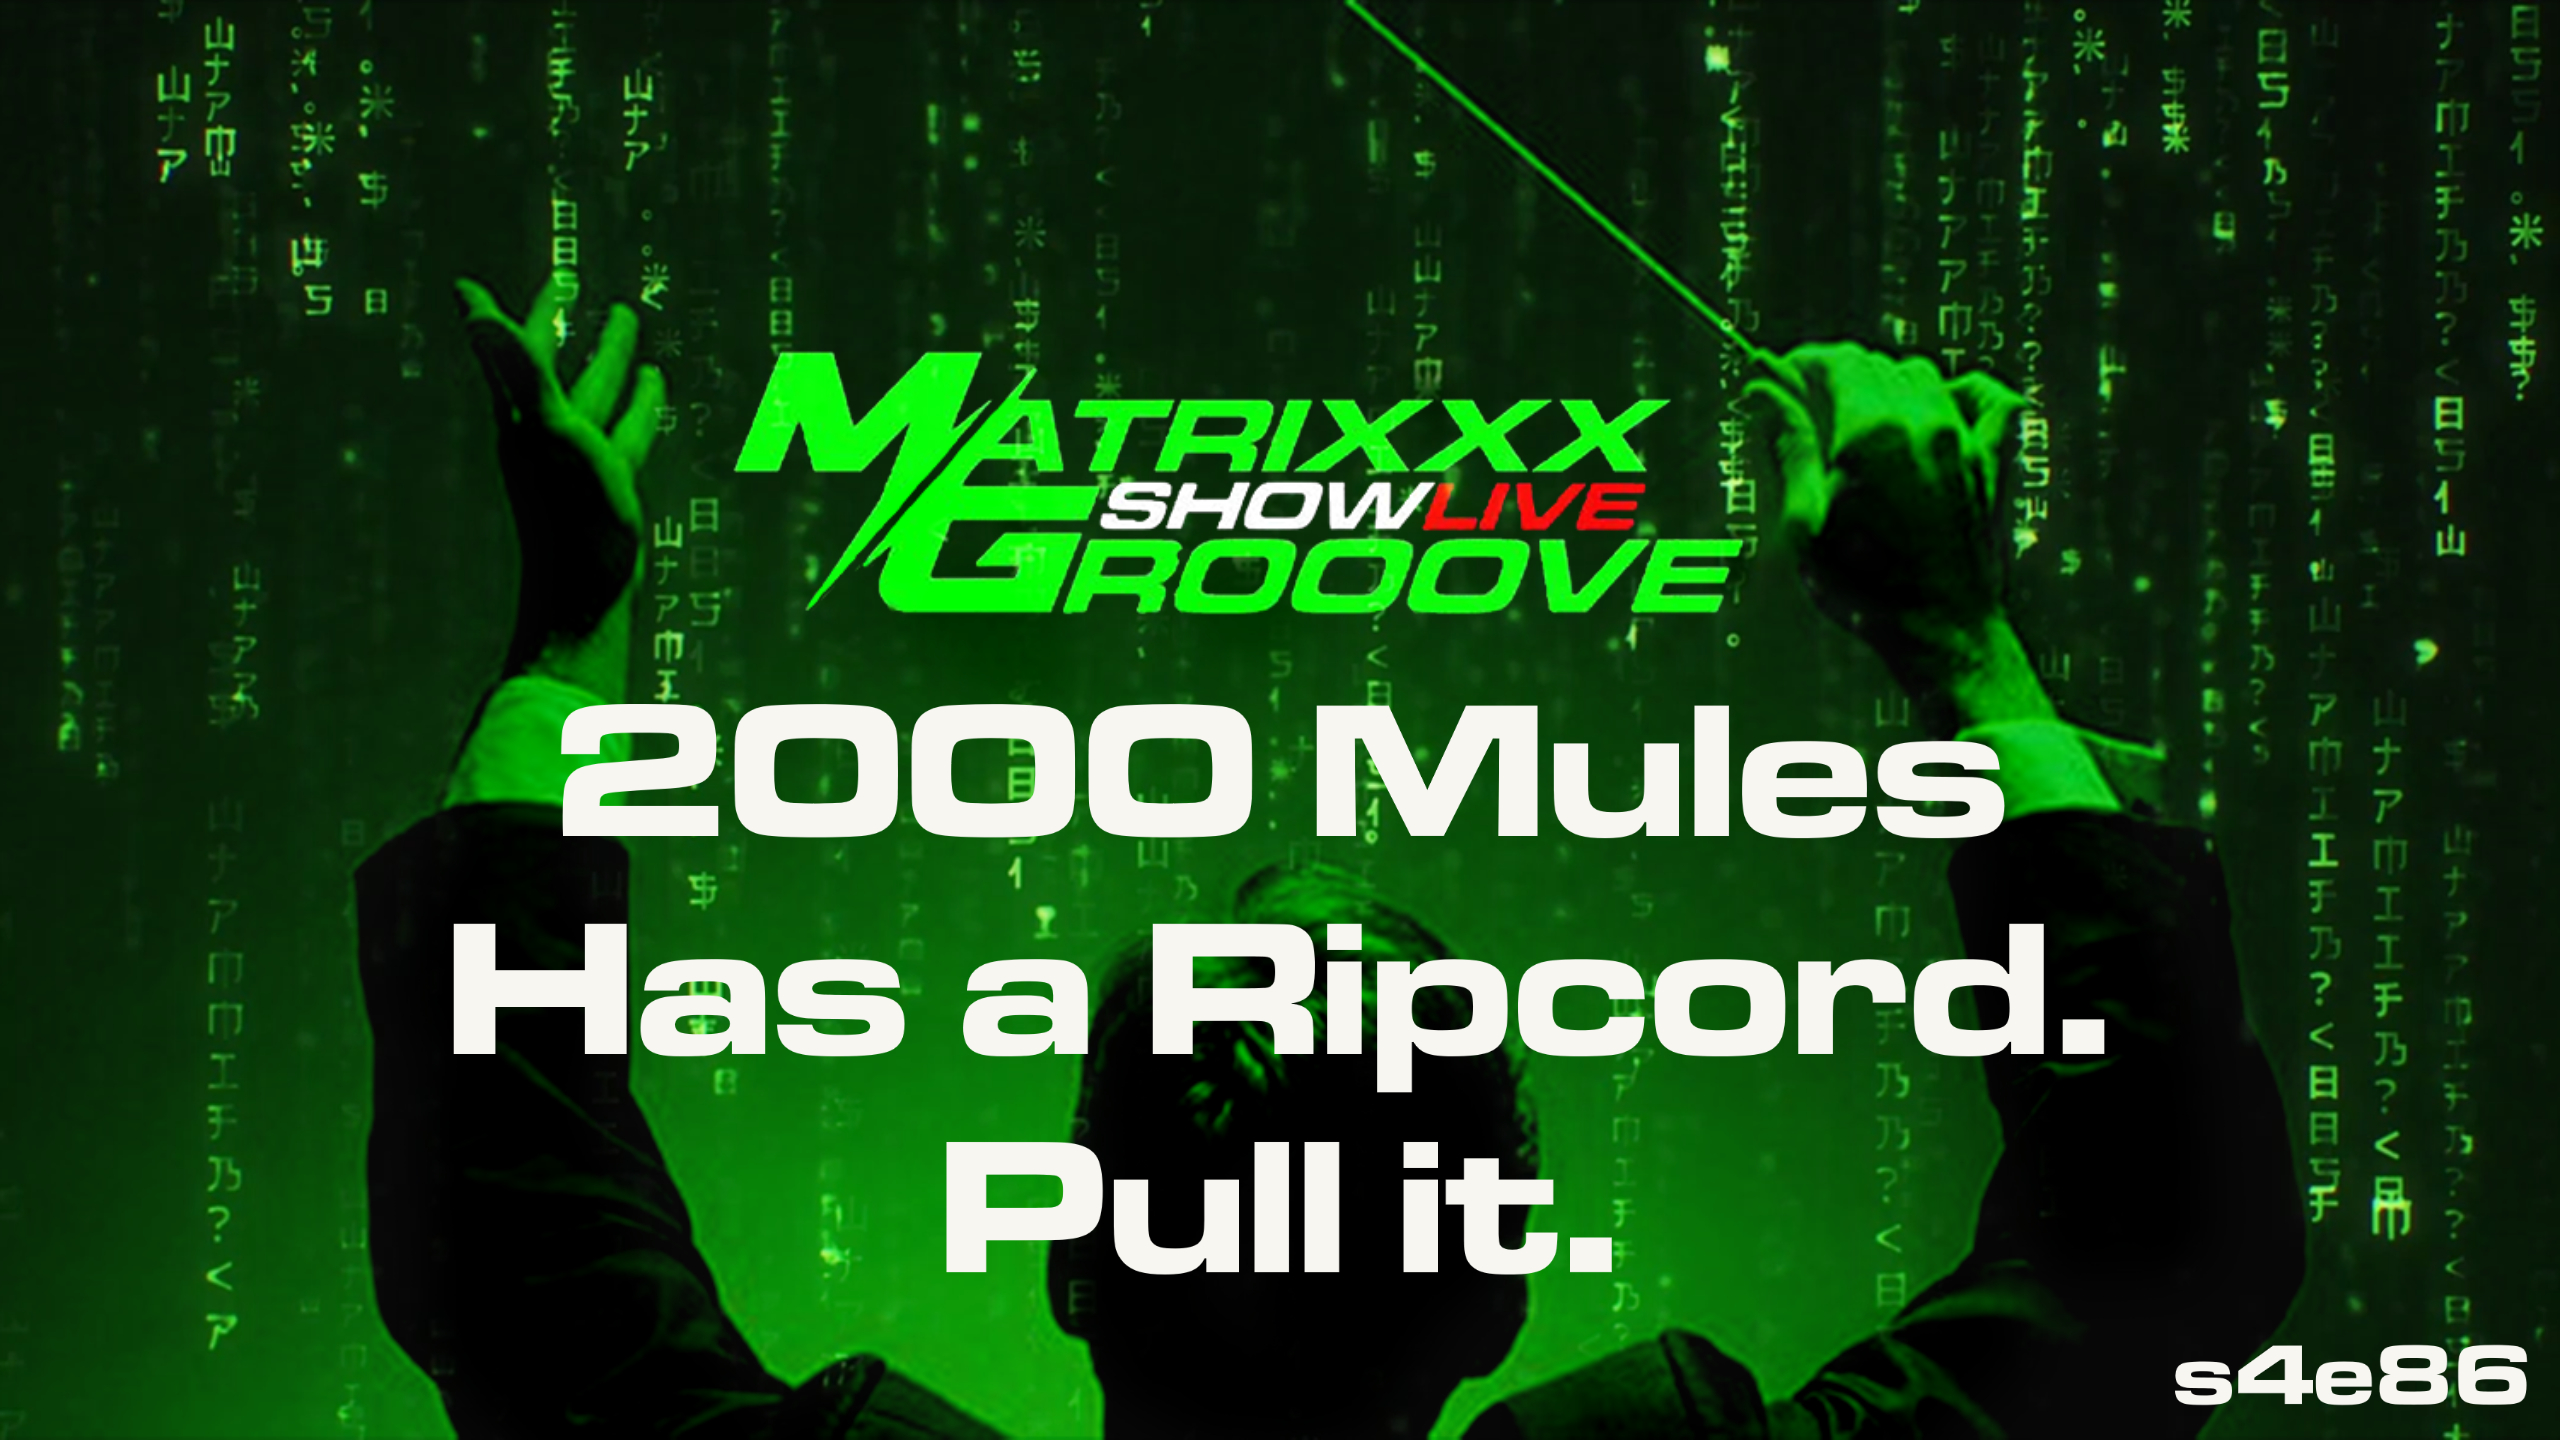 2000 Mules Has a Ripcord. Pull it.